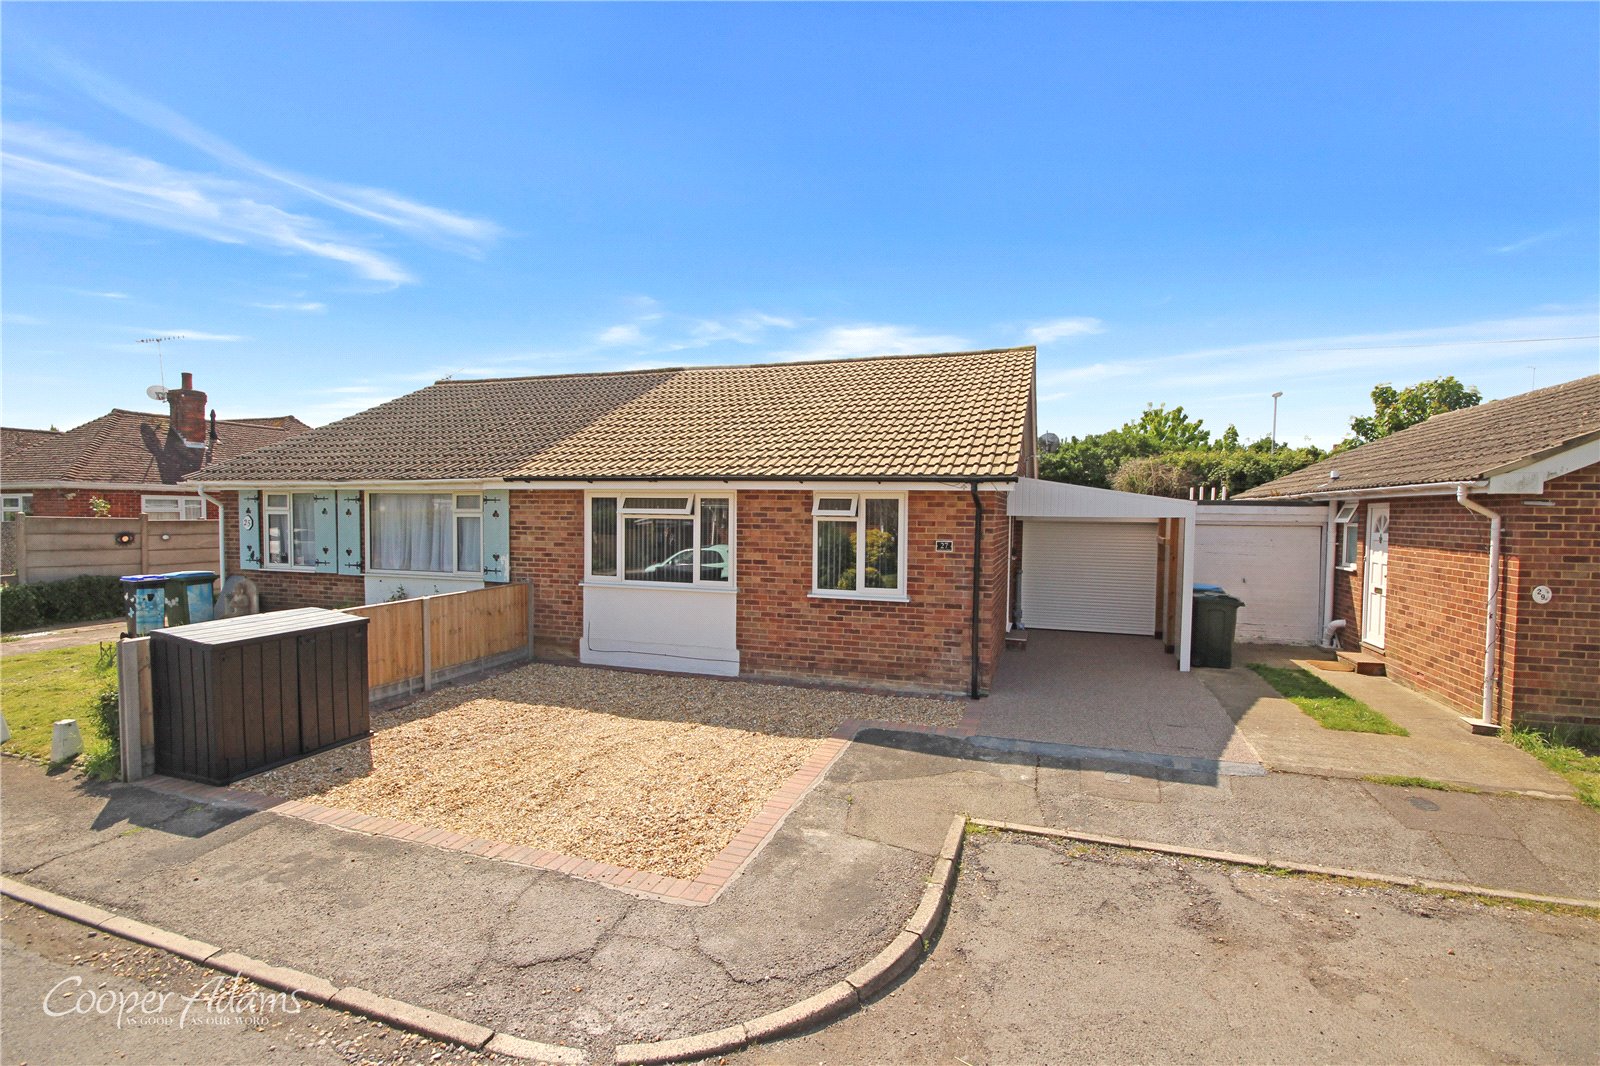 2 bed bungalow for sale - Property Image 1